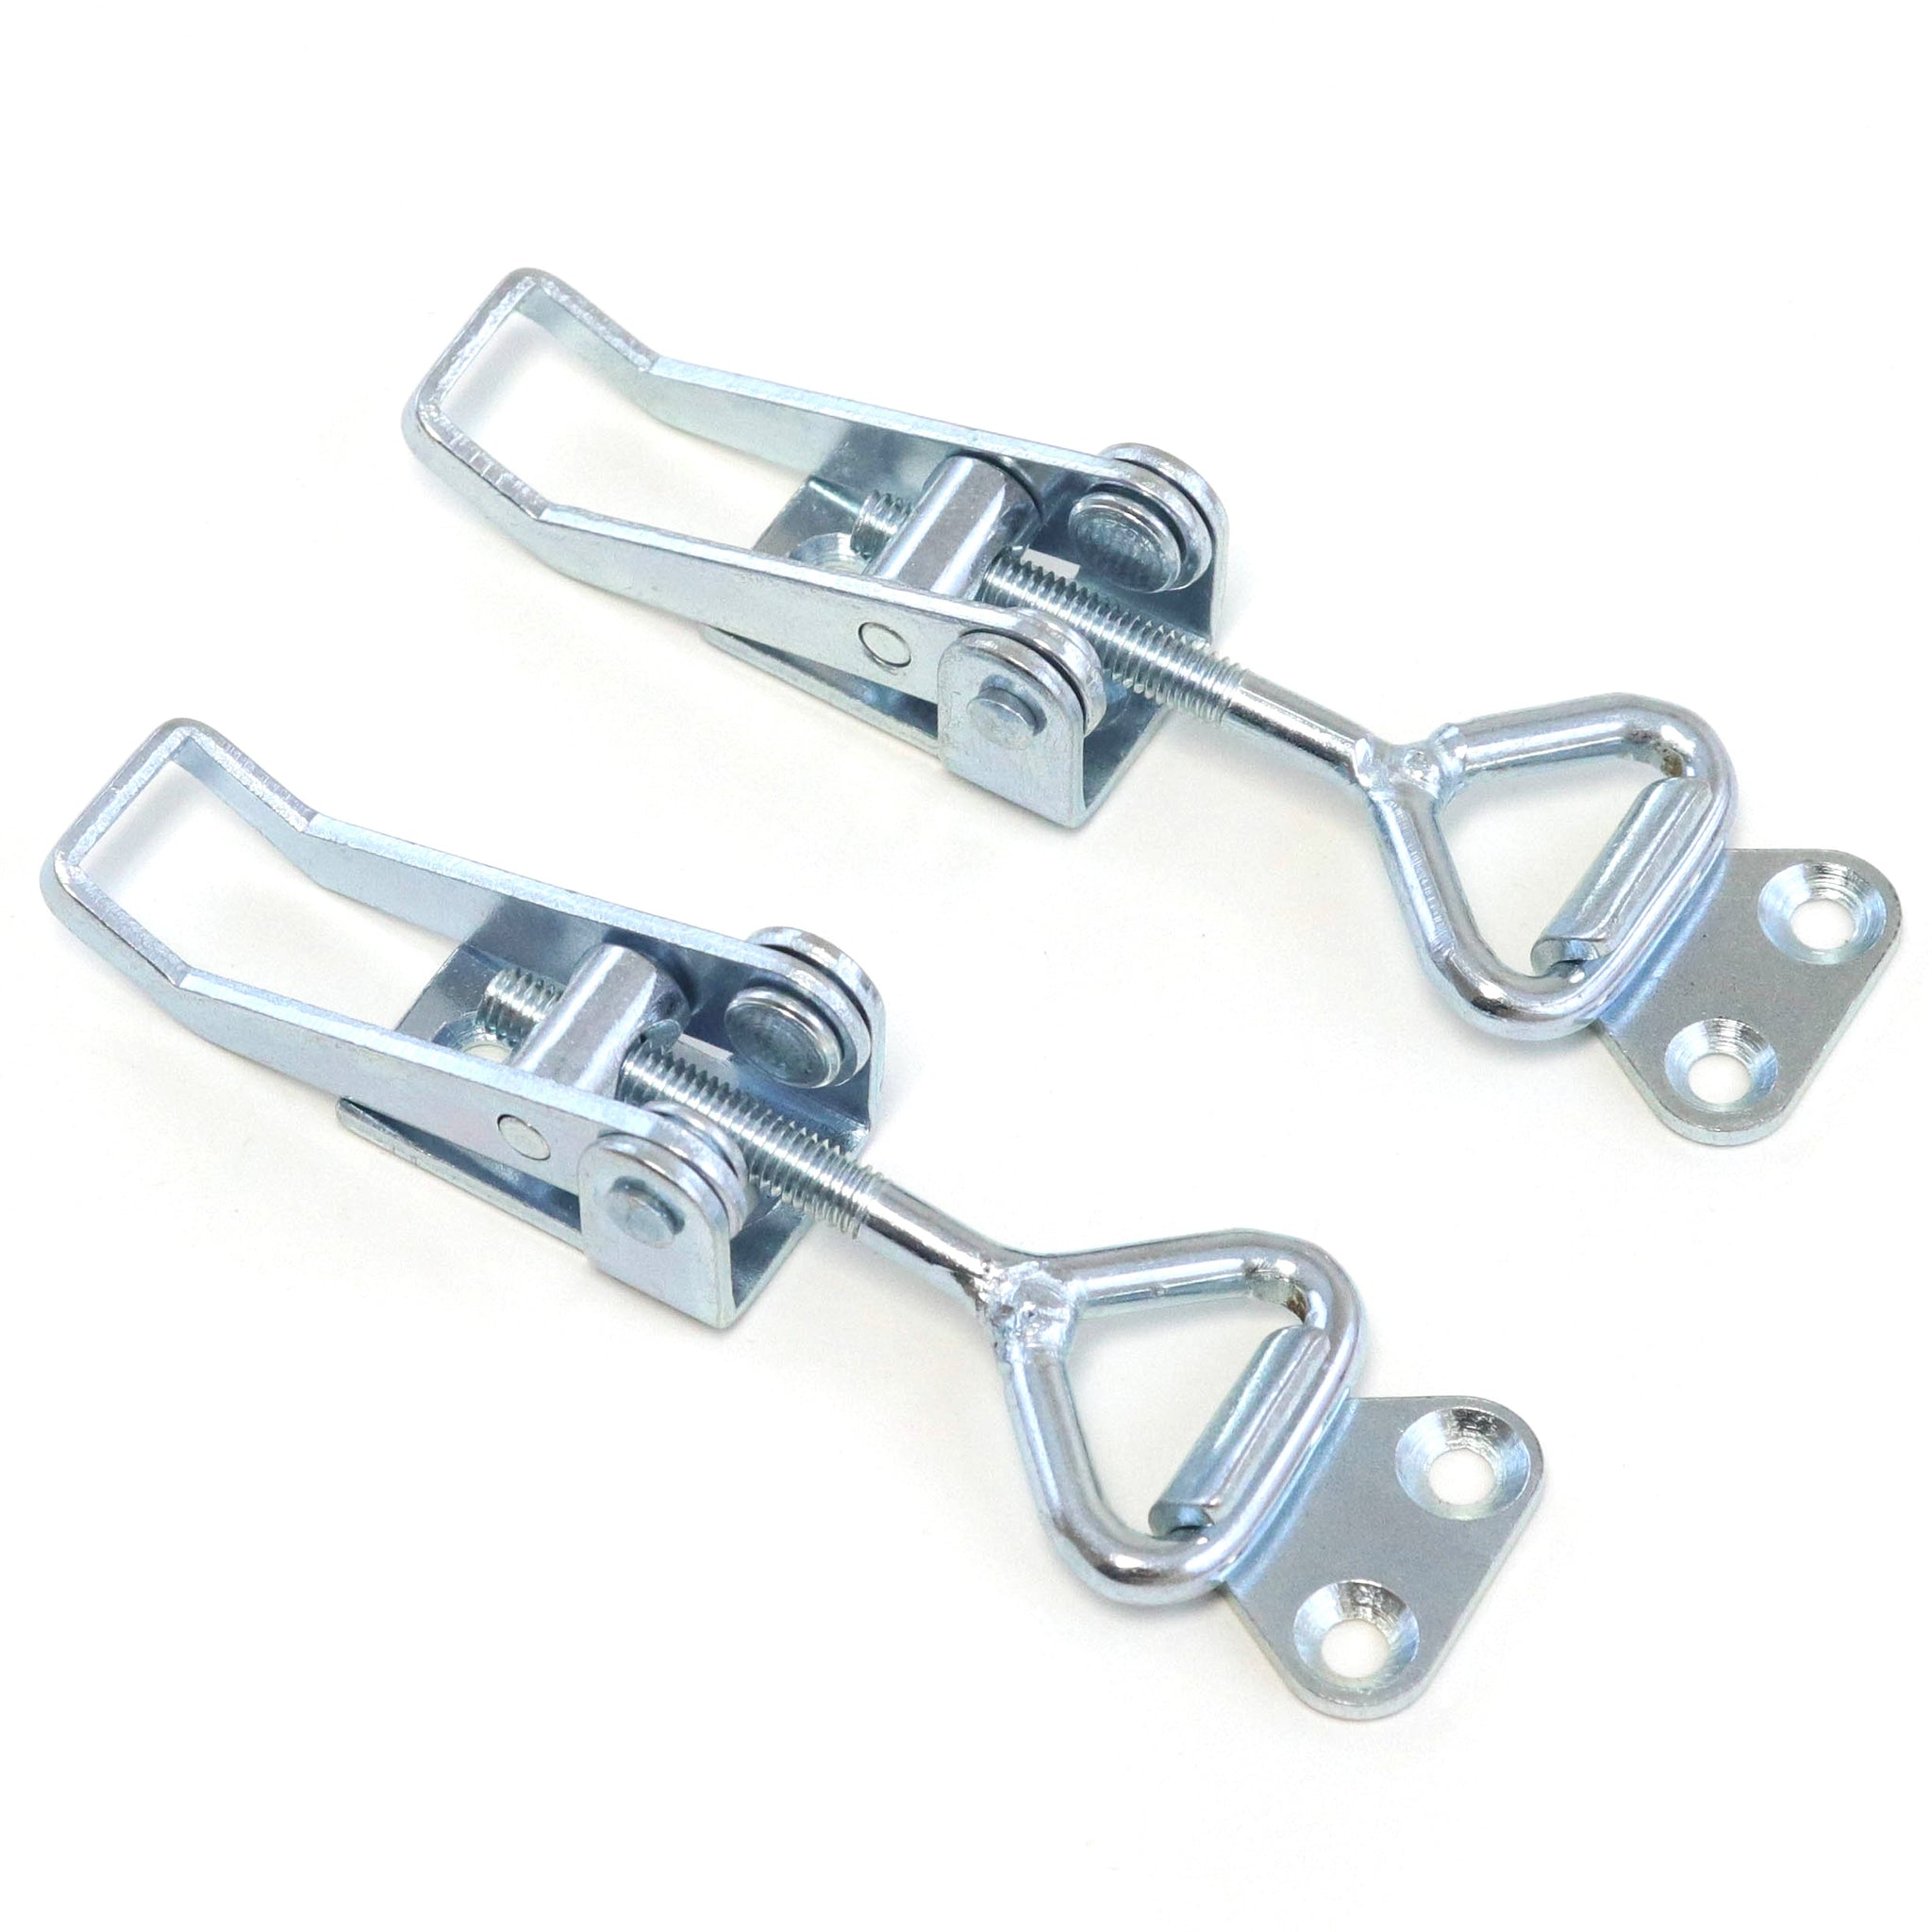 Red Hound Auto 2 Pull Latch Toggle Clamps Adjustable Coated Steel for Cabinets Doors Storage Boxes and More 2-1/8" 54 mm